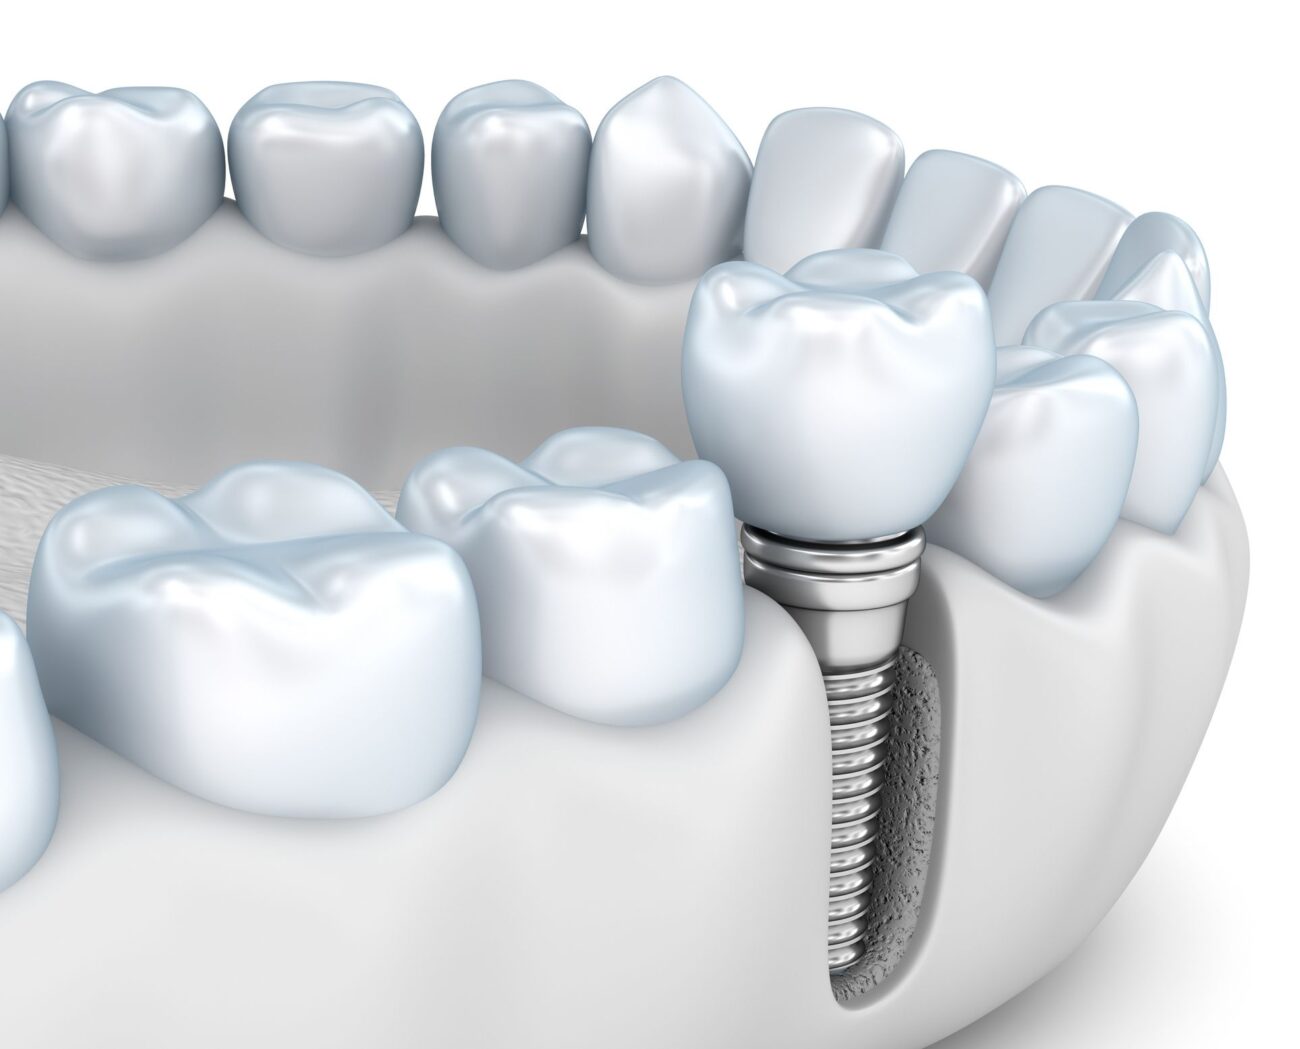 dental implants and jawbone health in Plano Texas